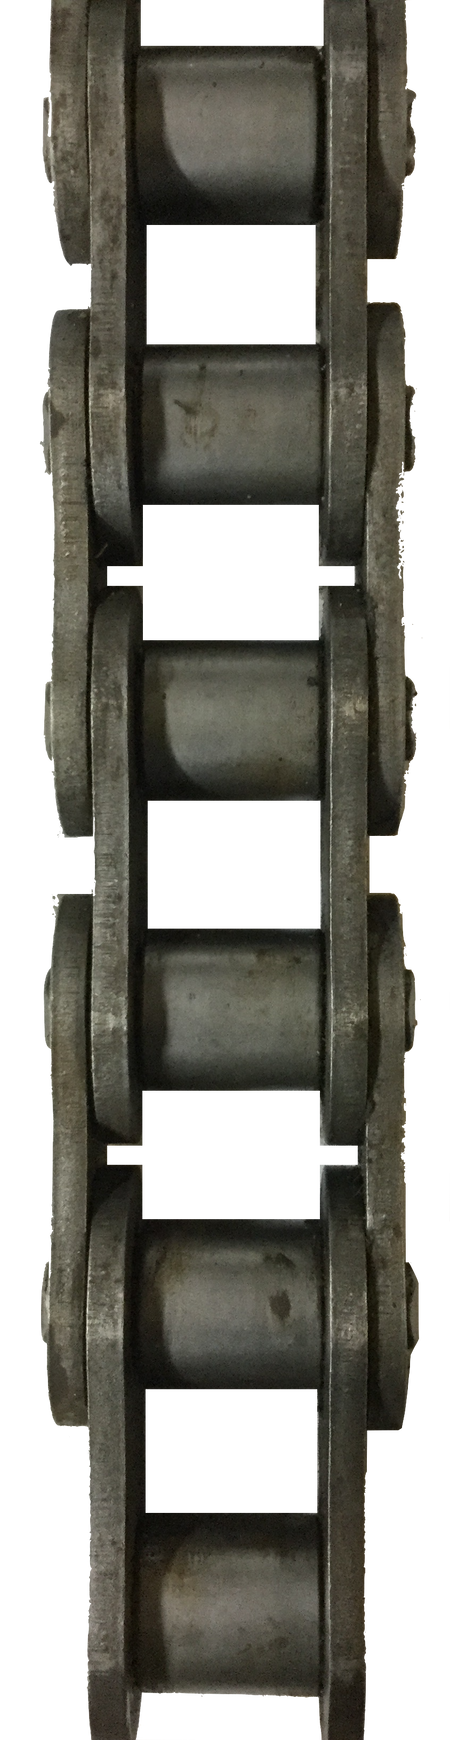 HKK #200 Standard Riveted Roller Chain (2.500" Pitch) - SOLD BY THE FOOT - Froedge Machine & Supply Co., Inc.